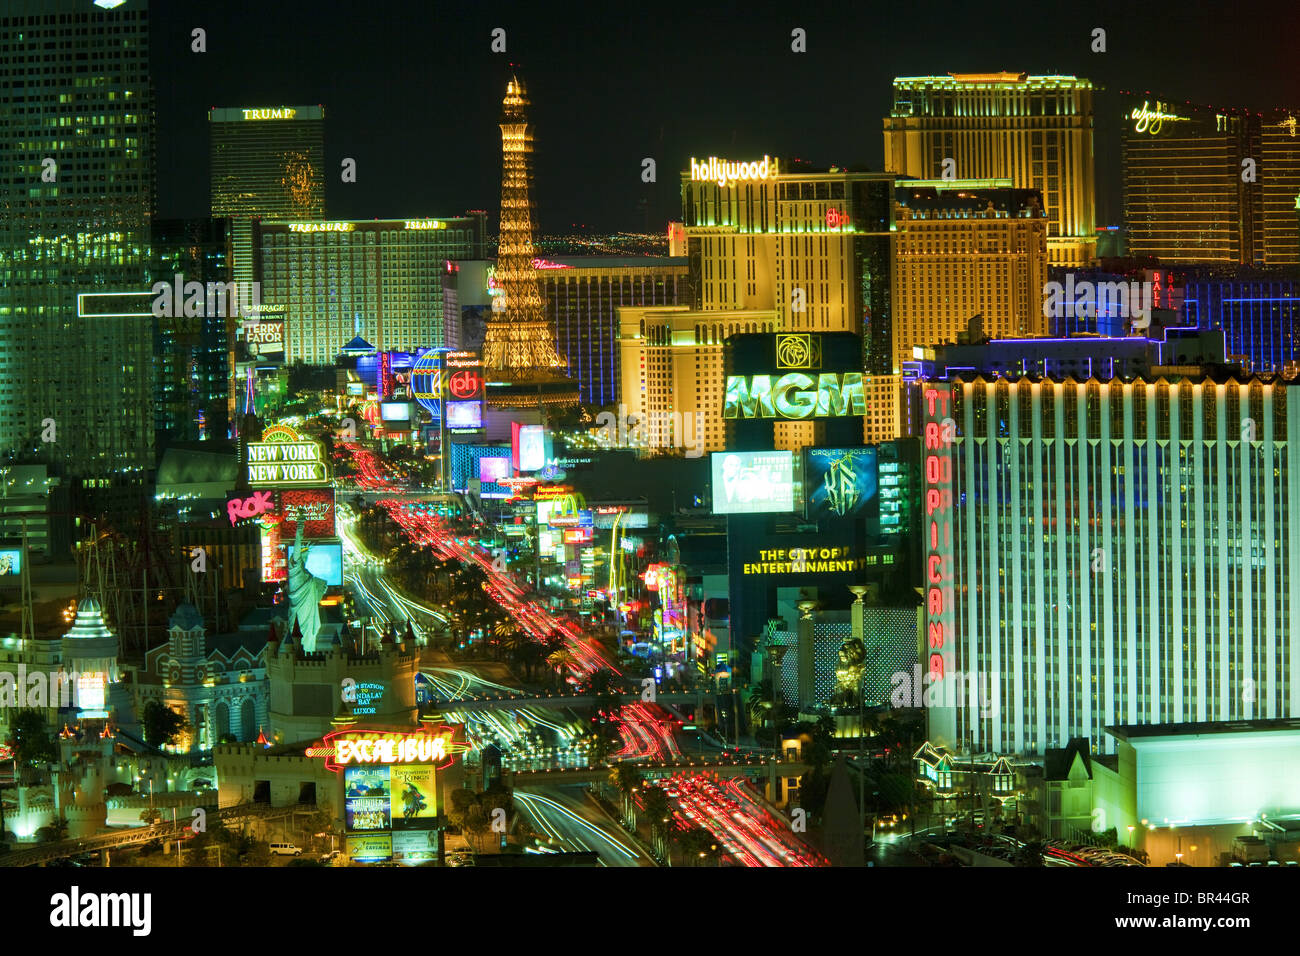 The Strip with the MGM Grand Hotel at night, Las Vegas, USA Stock Photo -  Alamy